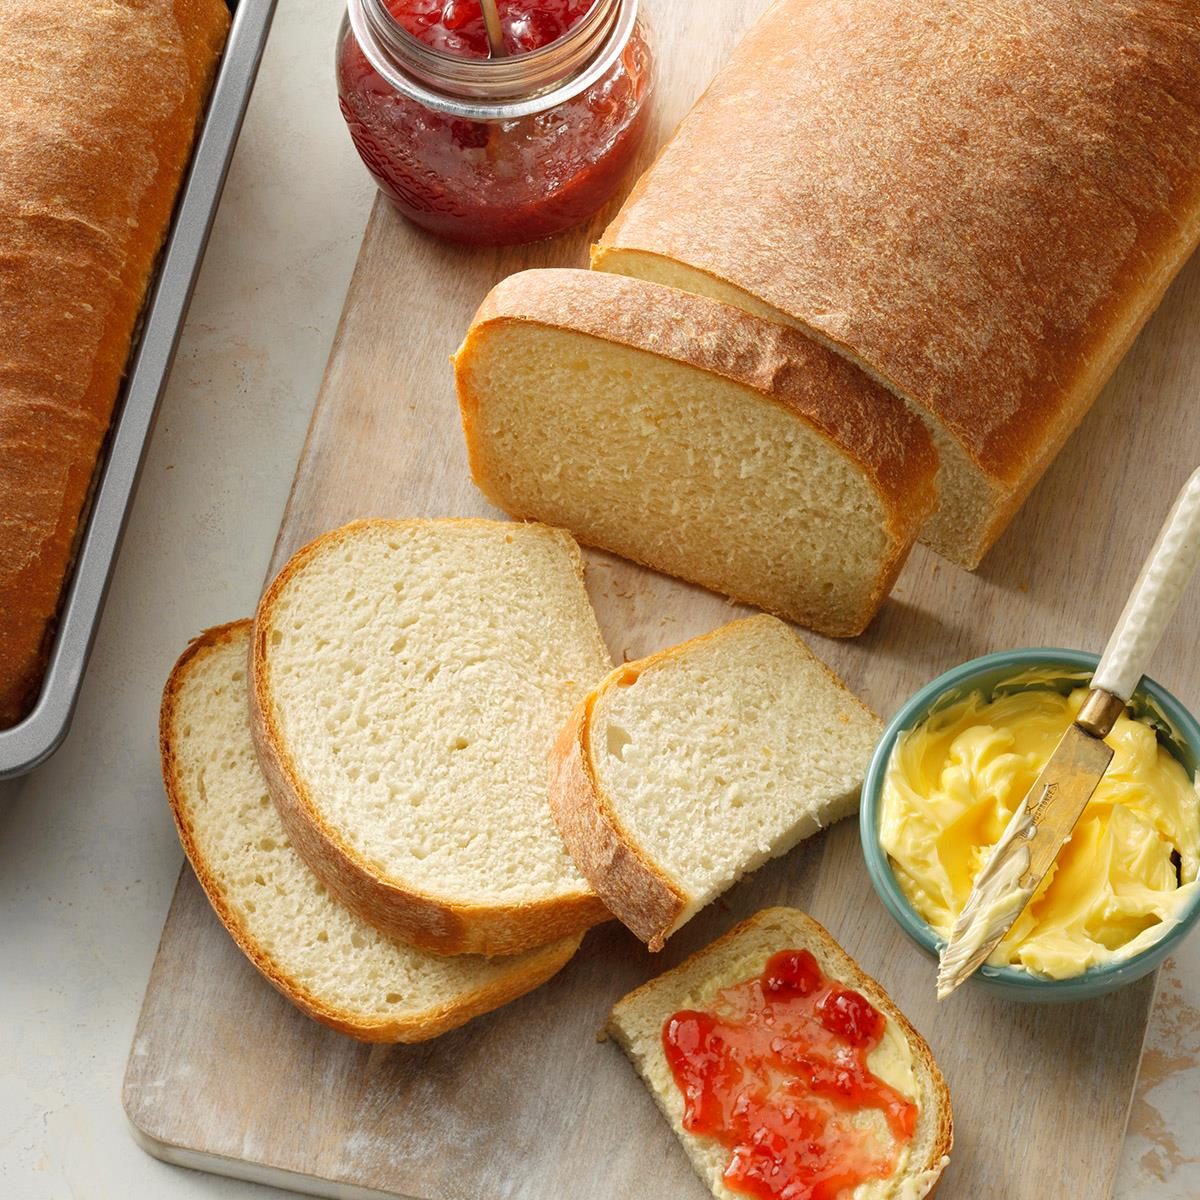 The Ultimate Guide To DIY Home Improvement Projects Using Sliced Bread